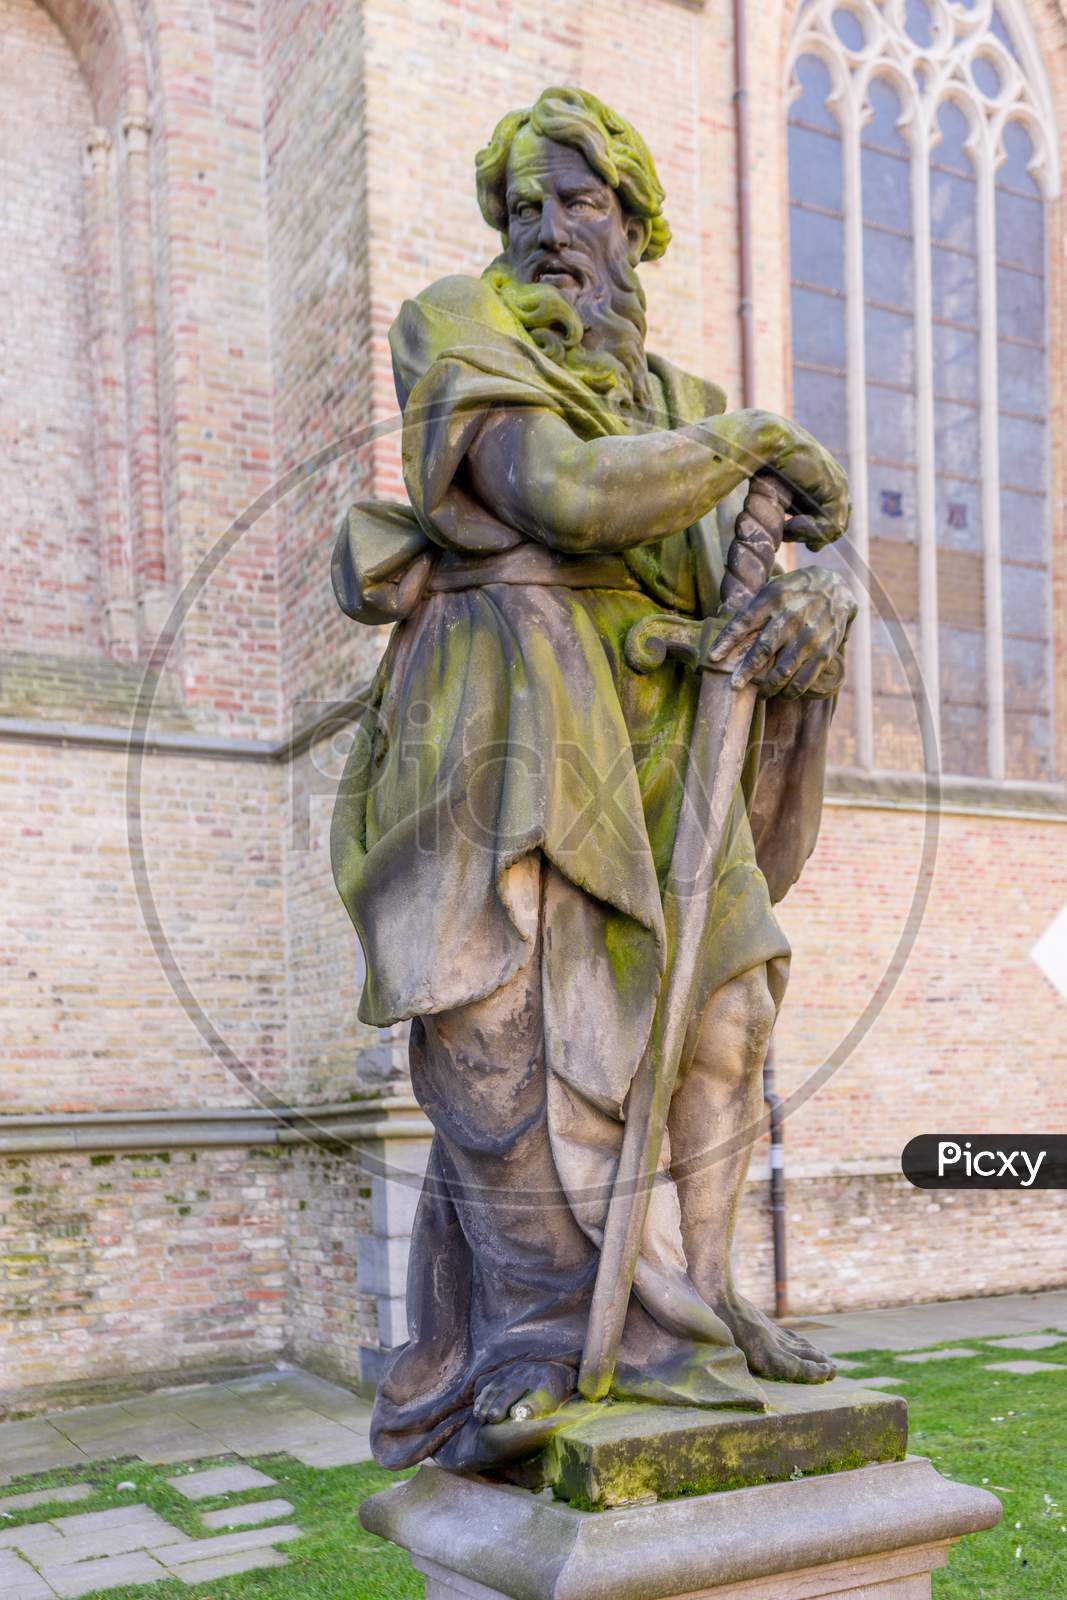 Bruges, Belgium - 17 February 2018: Statue In Front Of Church Of Our Lady In Bruges, Belgium